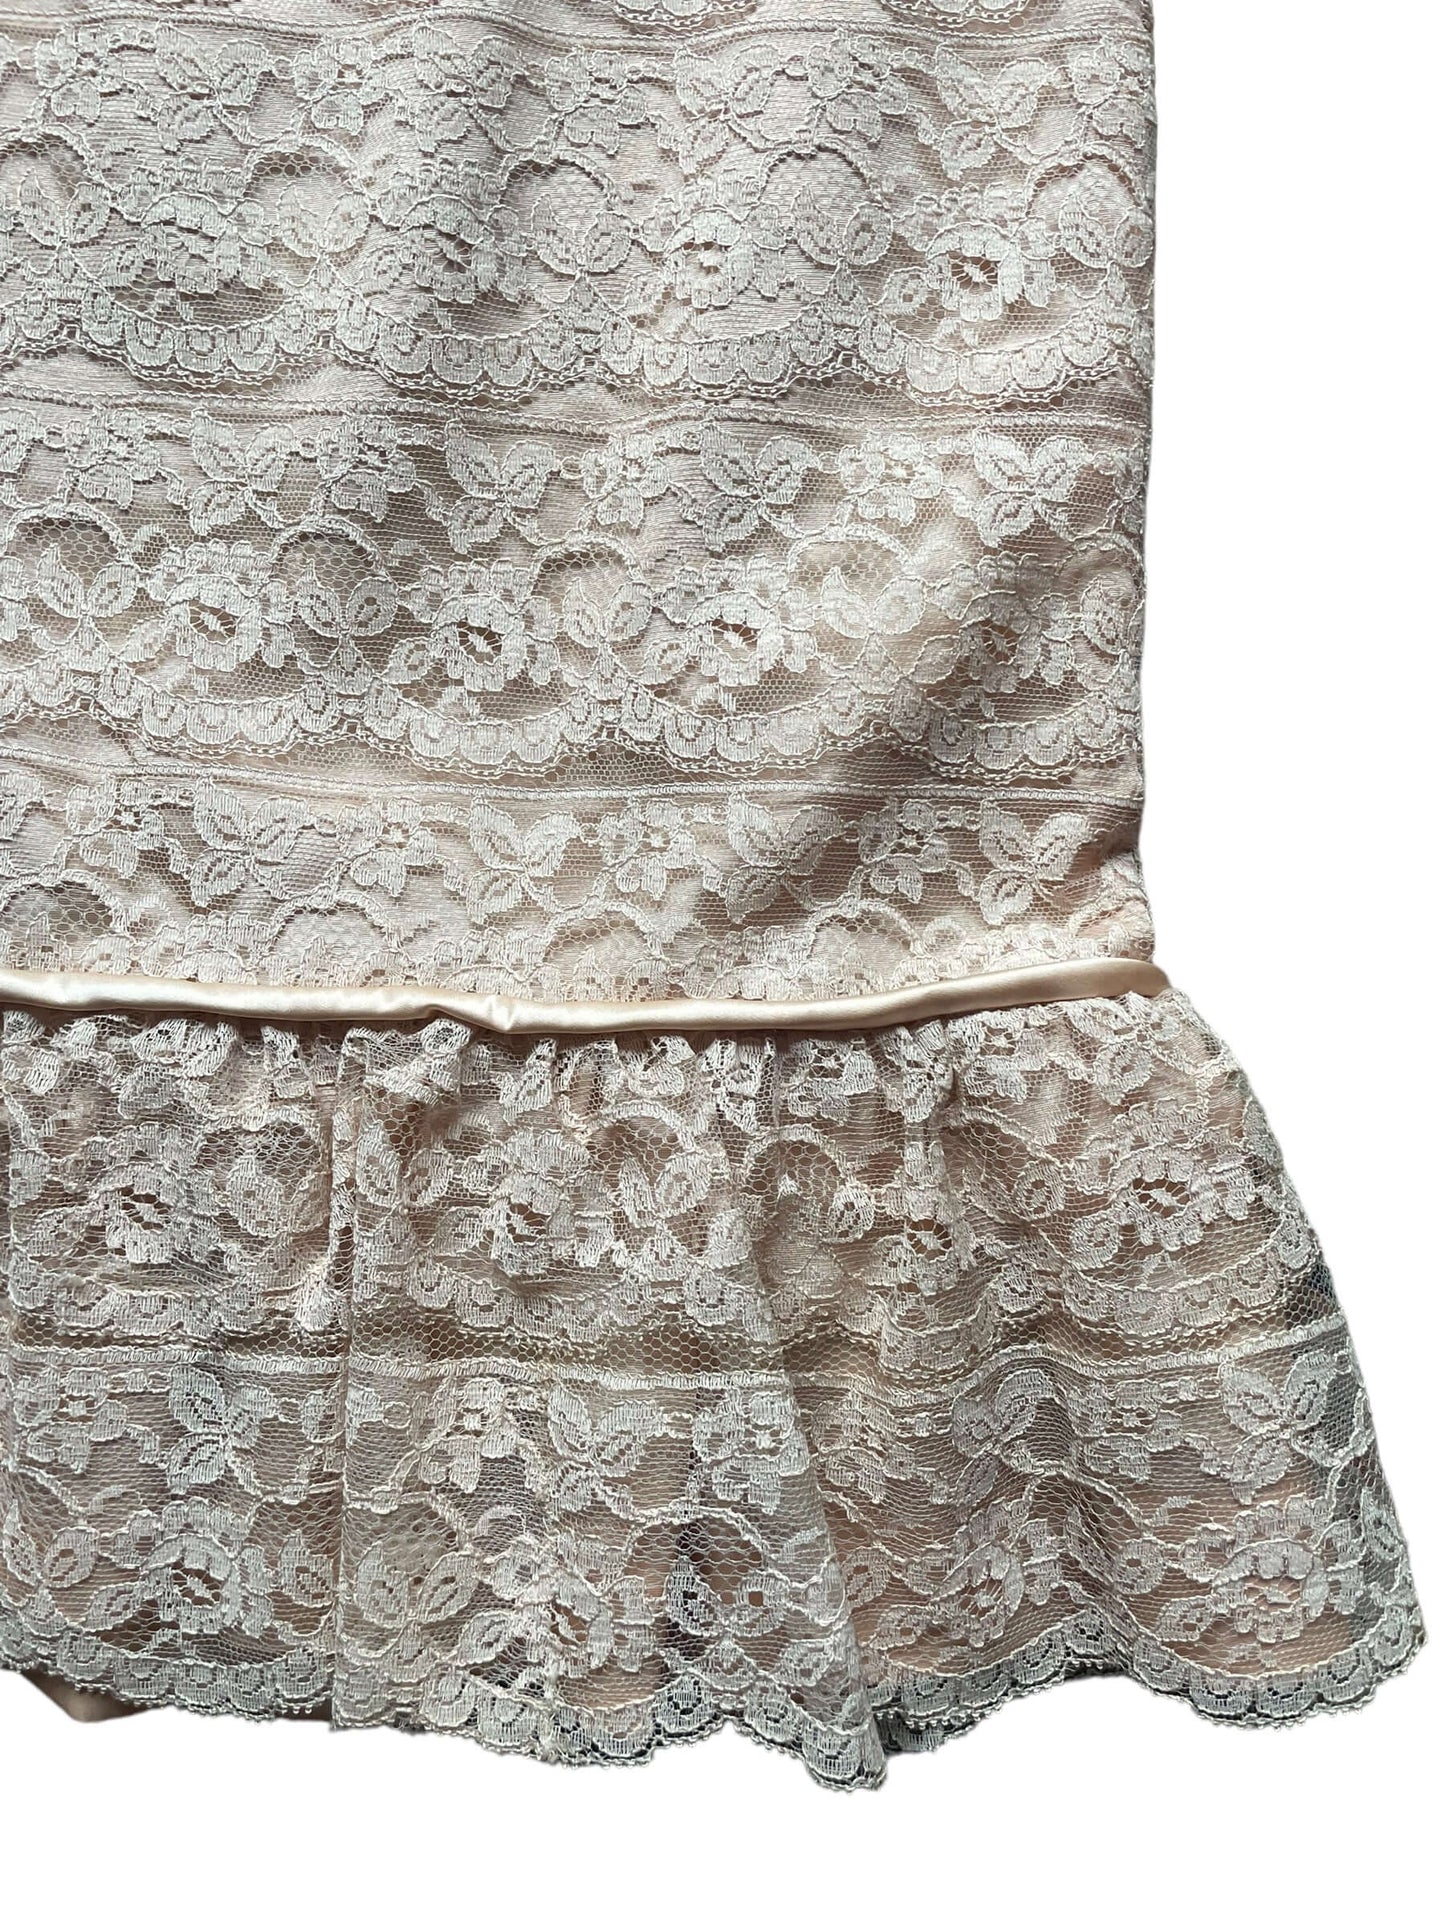 Back right skirt view of Vintage 1950s Dusty Pink Lace Dress  |  Barn Owl Vintage Dresses | Seattle Vintage Ladies Clothing